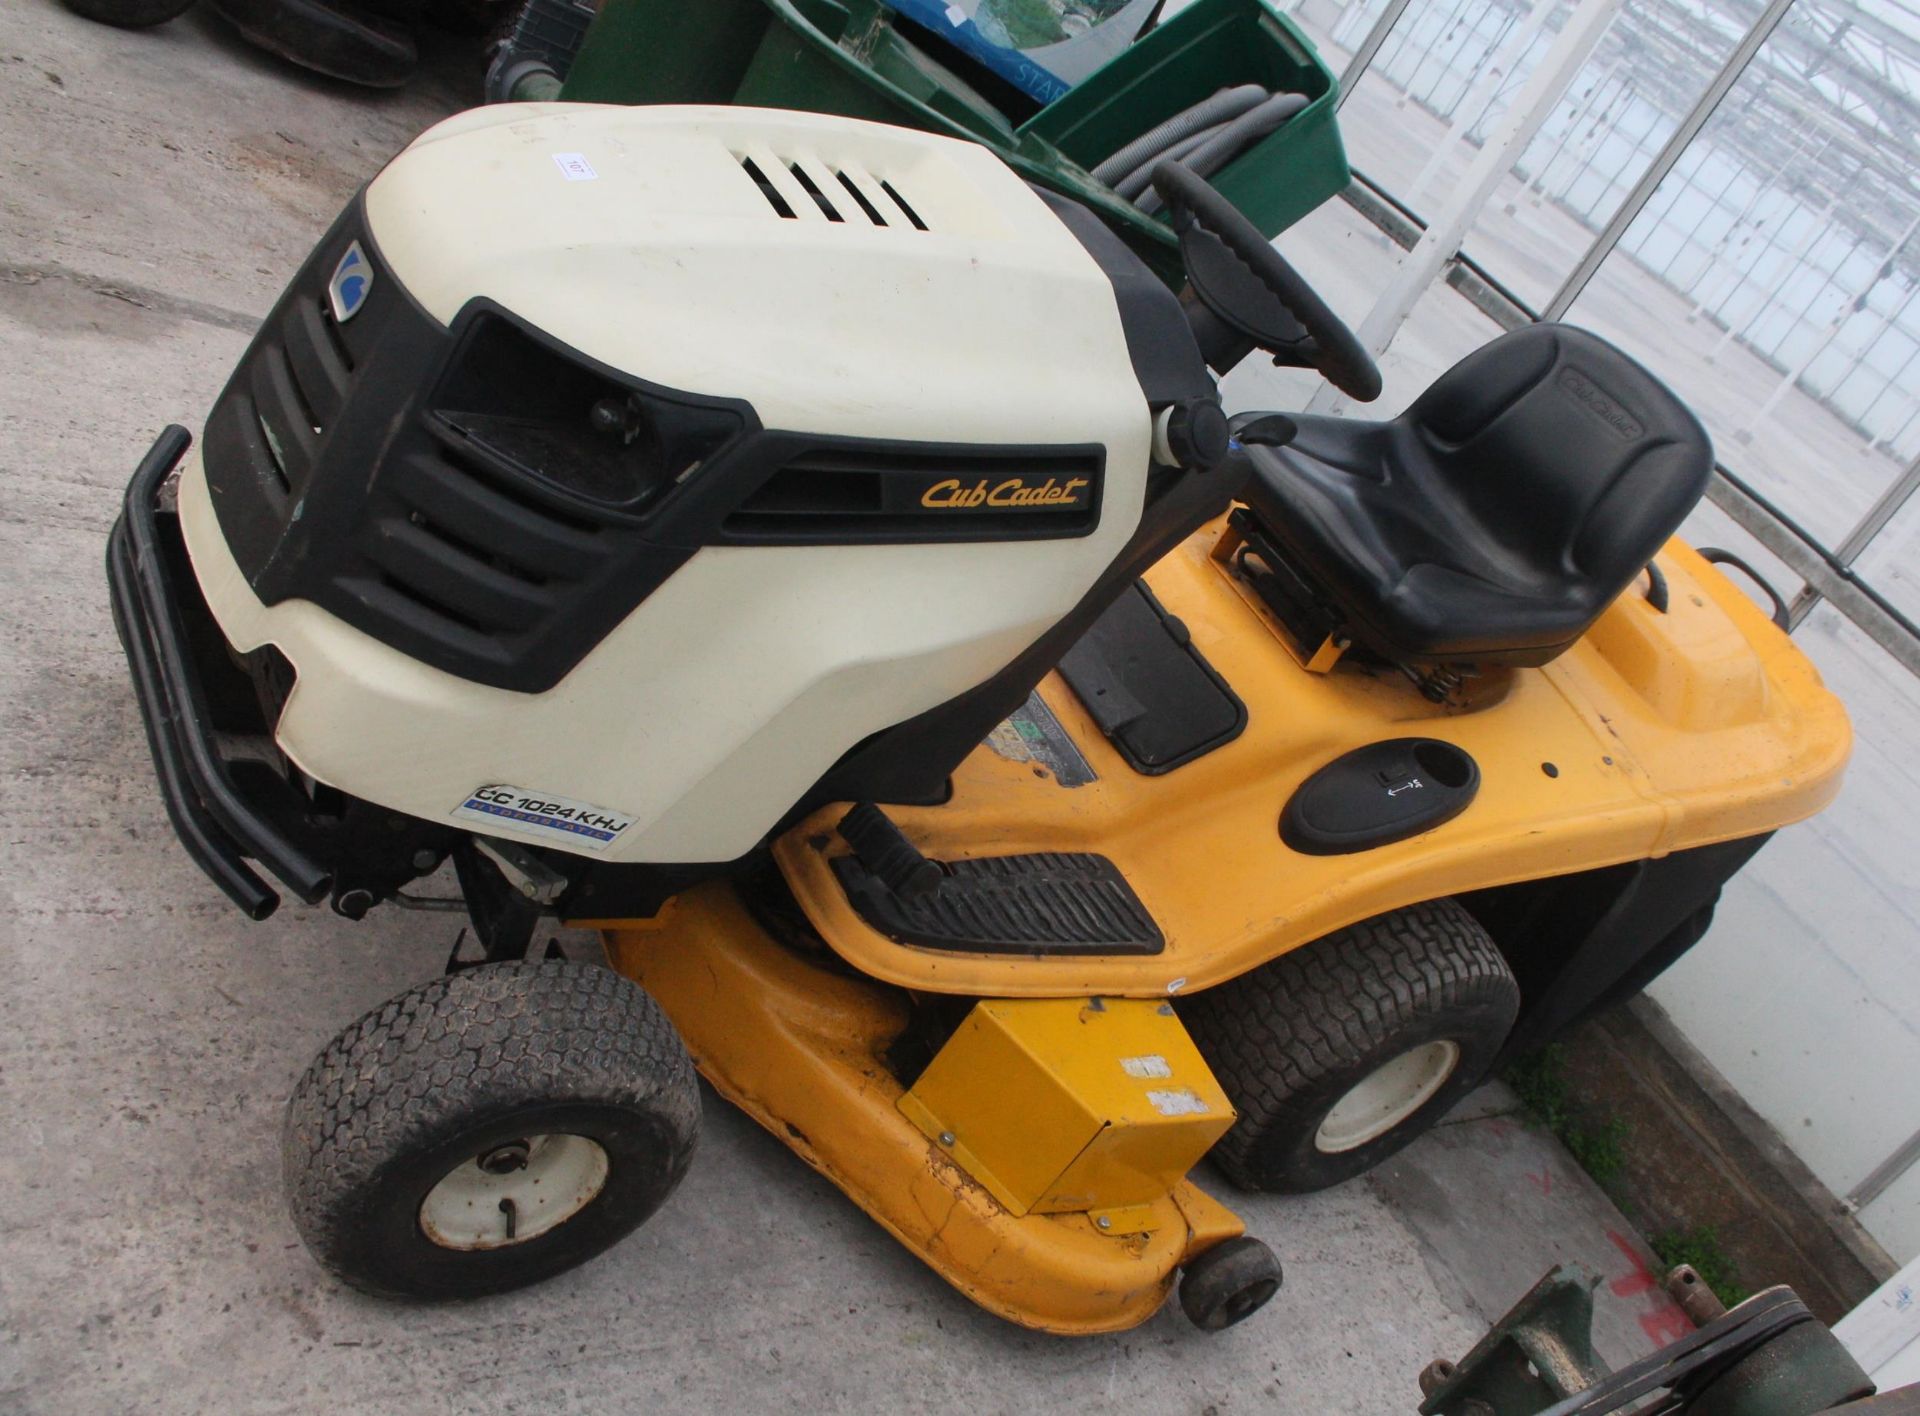 A CUB CADET RIDE ON MOWER WORKING ORDER BUT NO WARRANTY NO VAT - Image 2 of 3